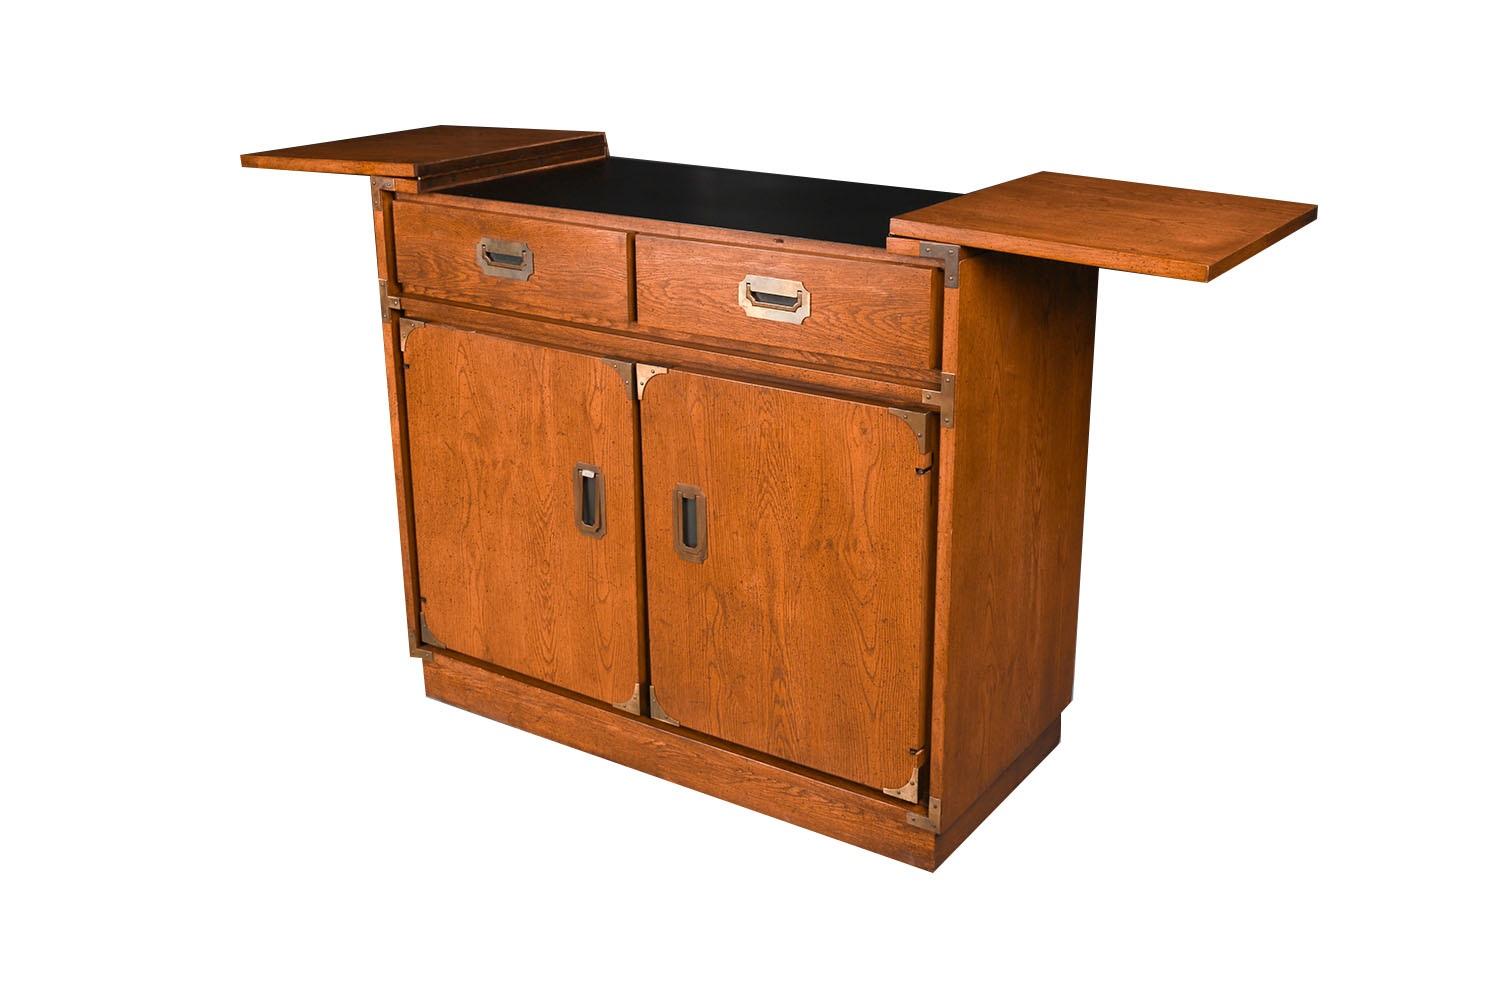 Mid-century campaign style console bar cabinet is an excellent example of mid-century modern. Minimalist Danish Modern inspired profile, with exceptional construction and style and adorned with original stylish, sculpted, brass pulls.  Featuring